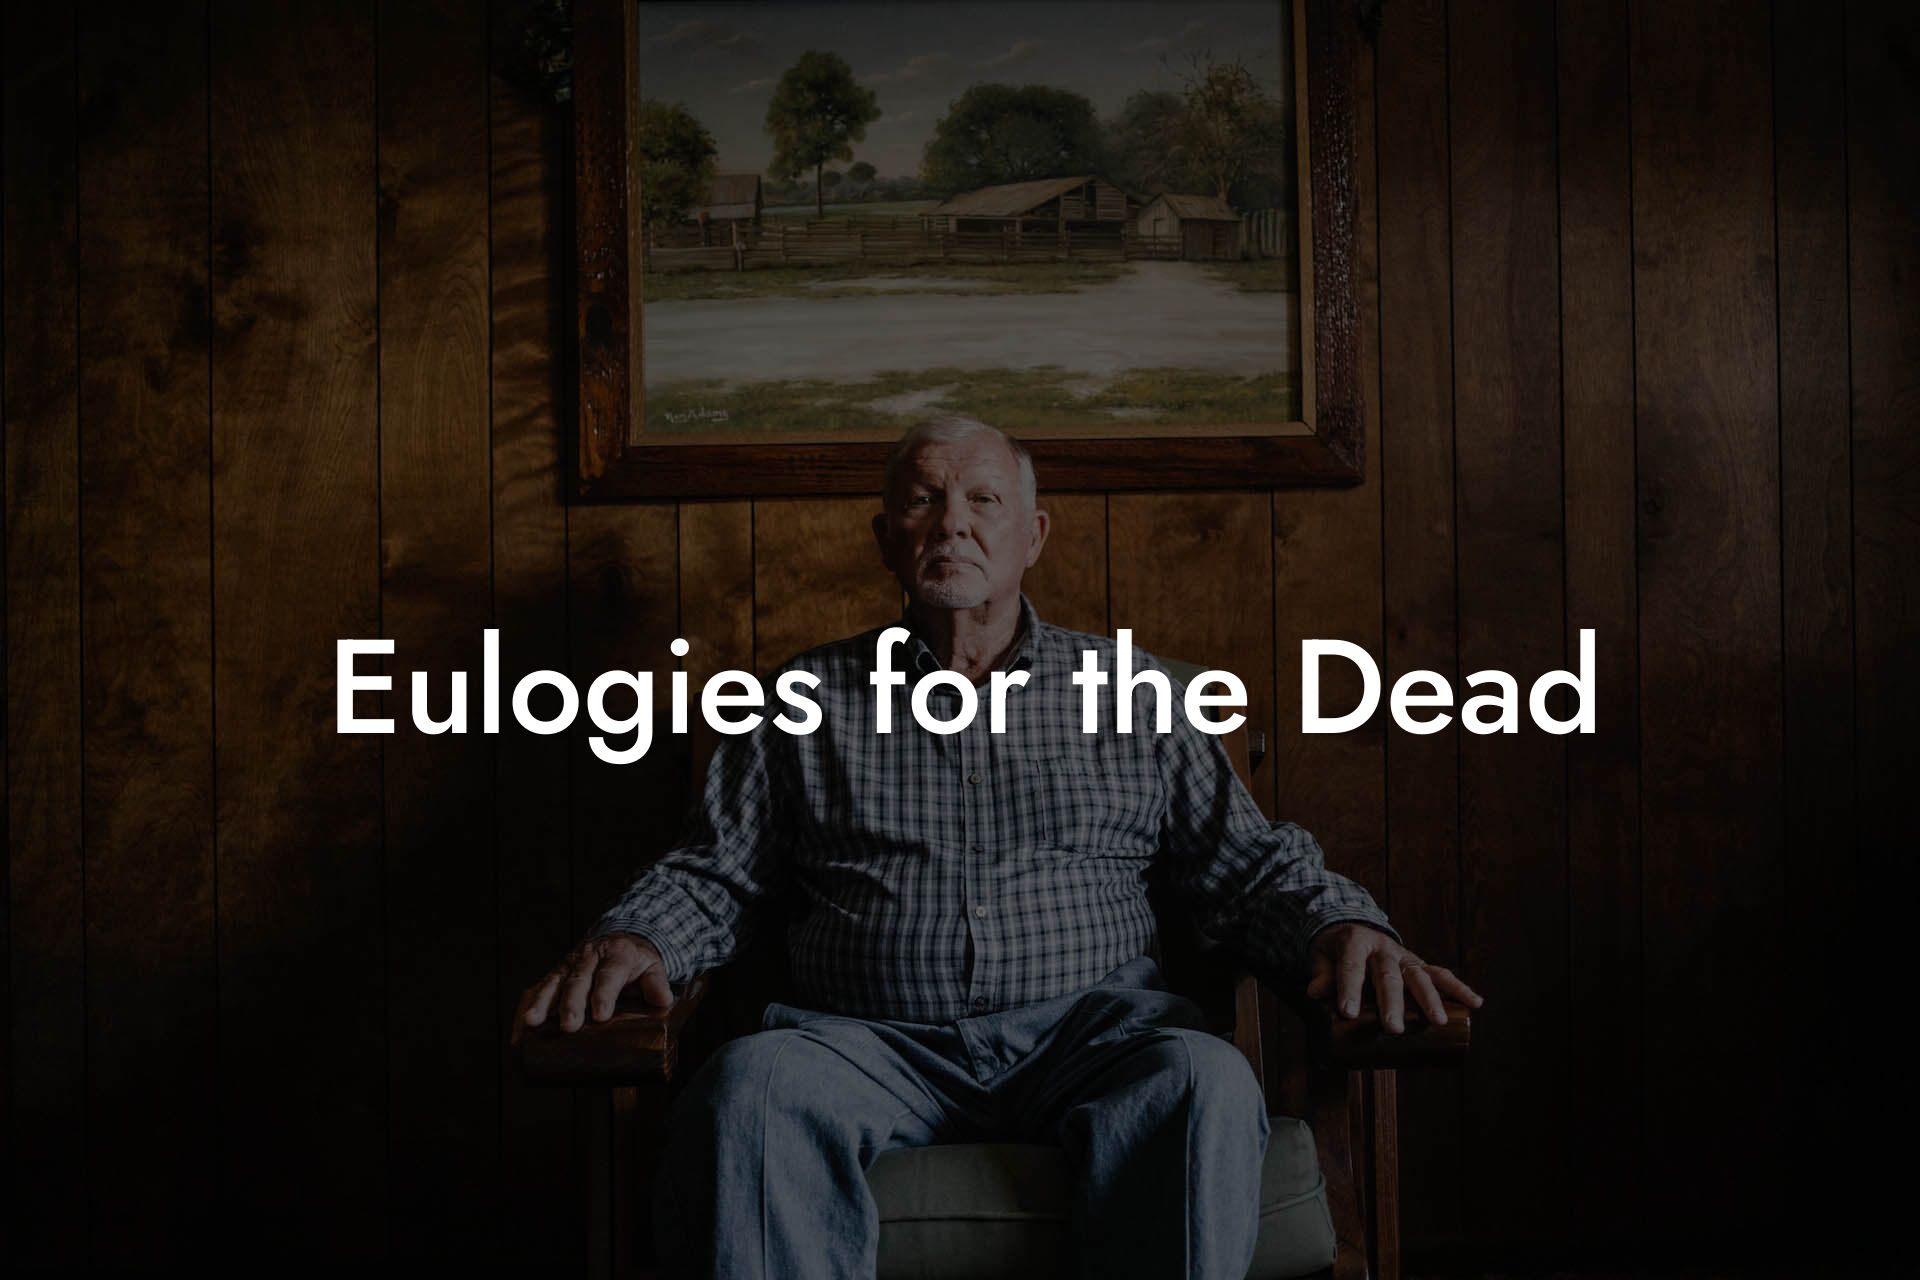 Eulogies for the Dead